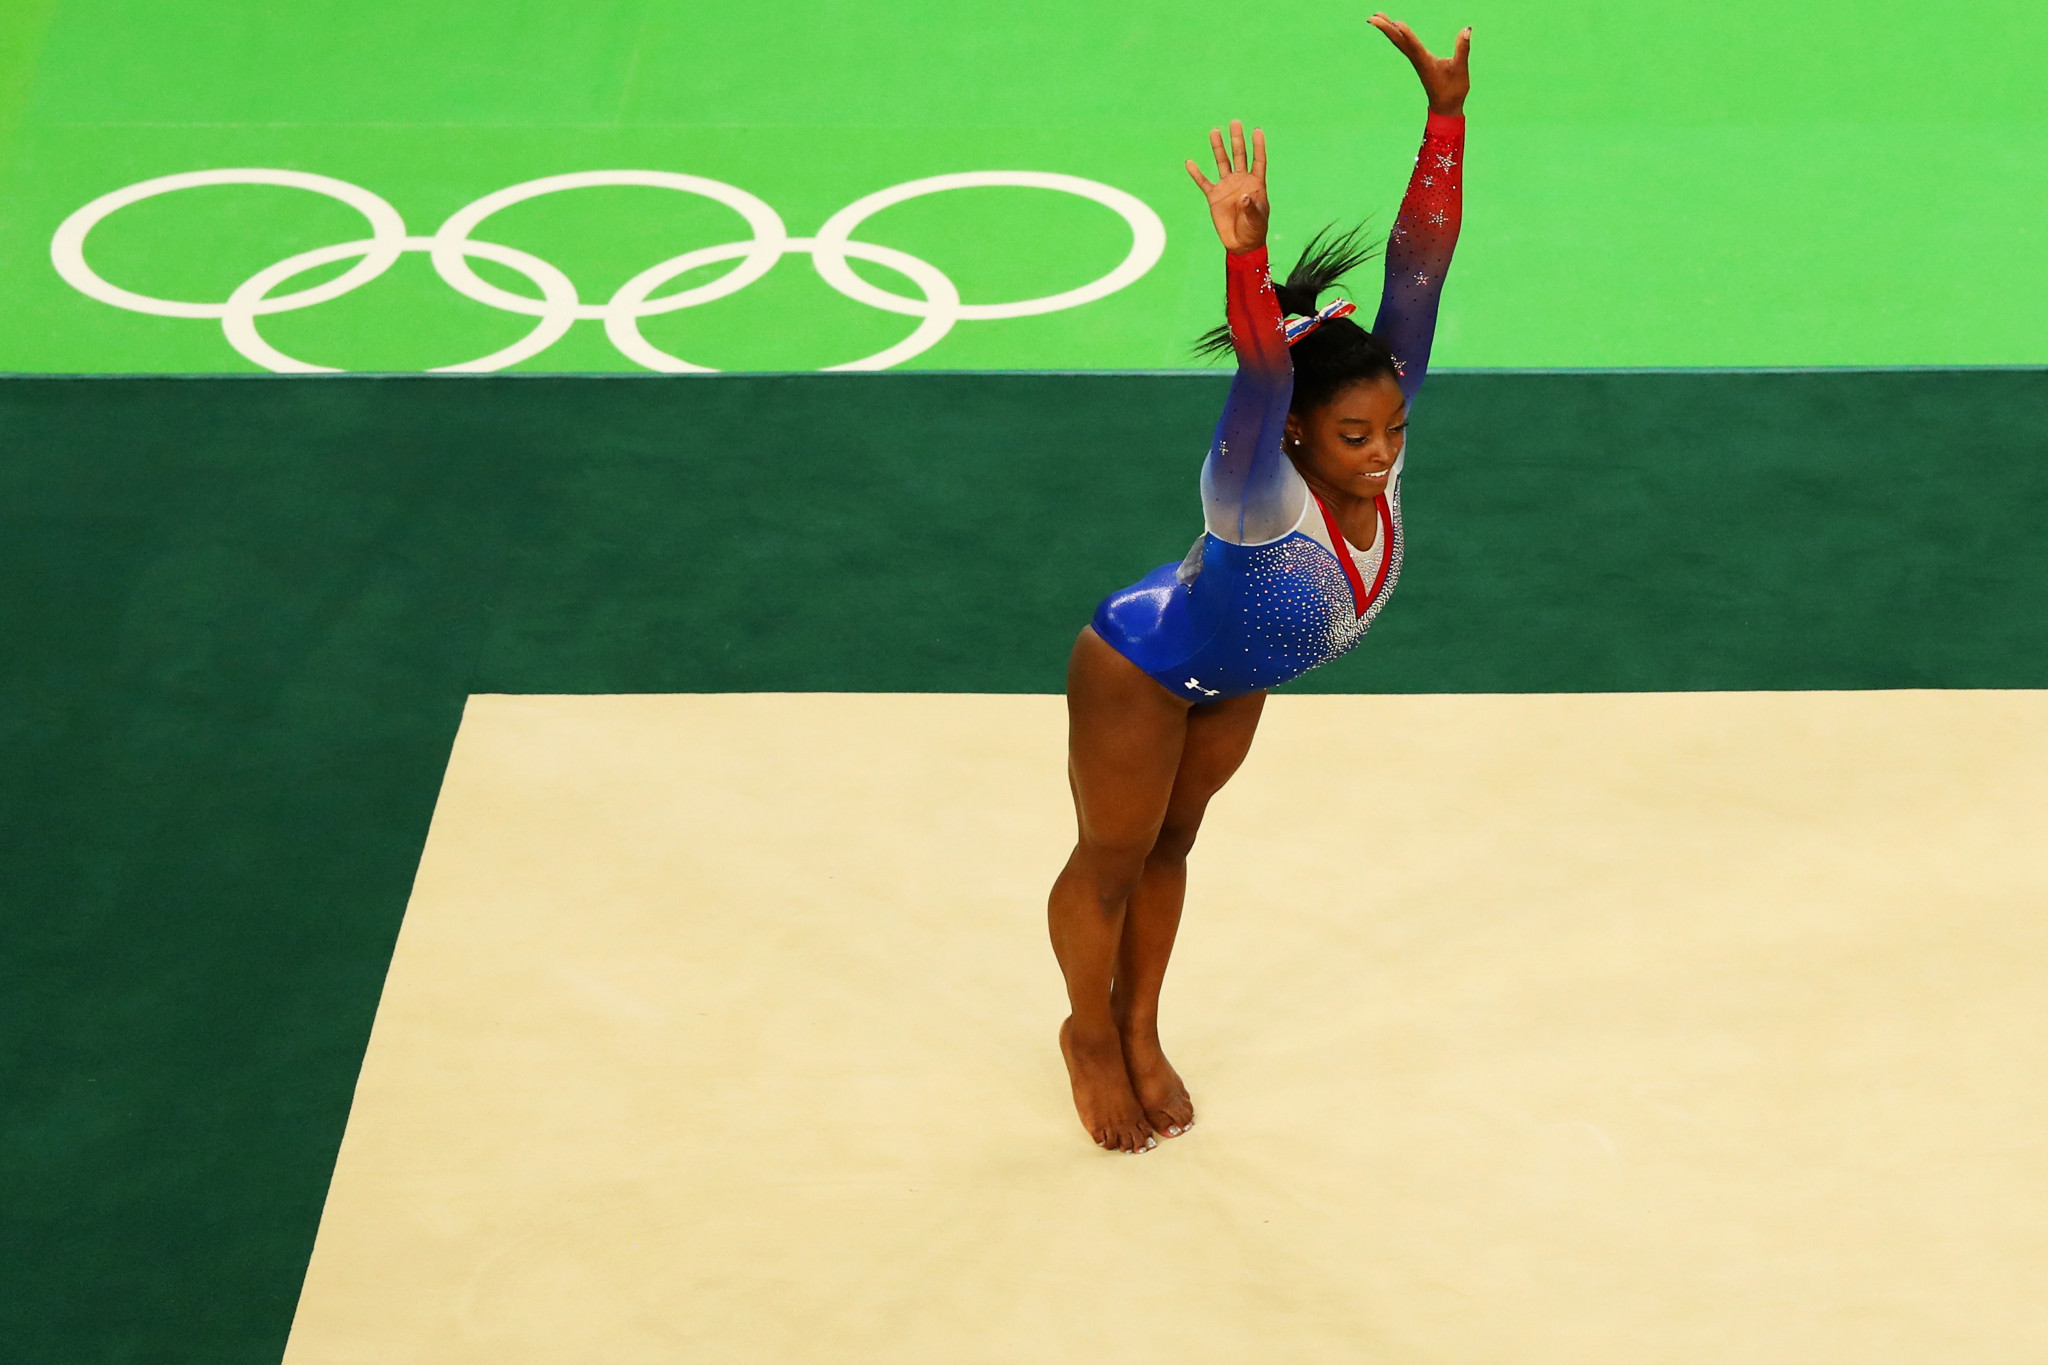 Fourtime Olympic champion Biles says she was victim of sexual abuse by